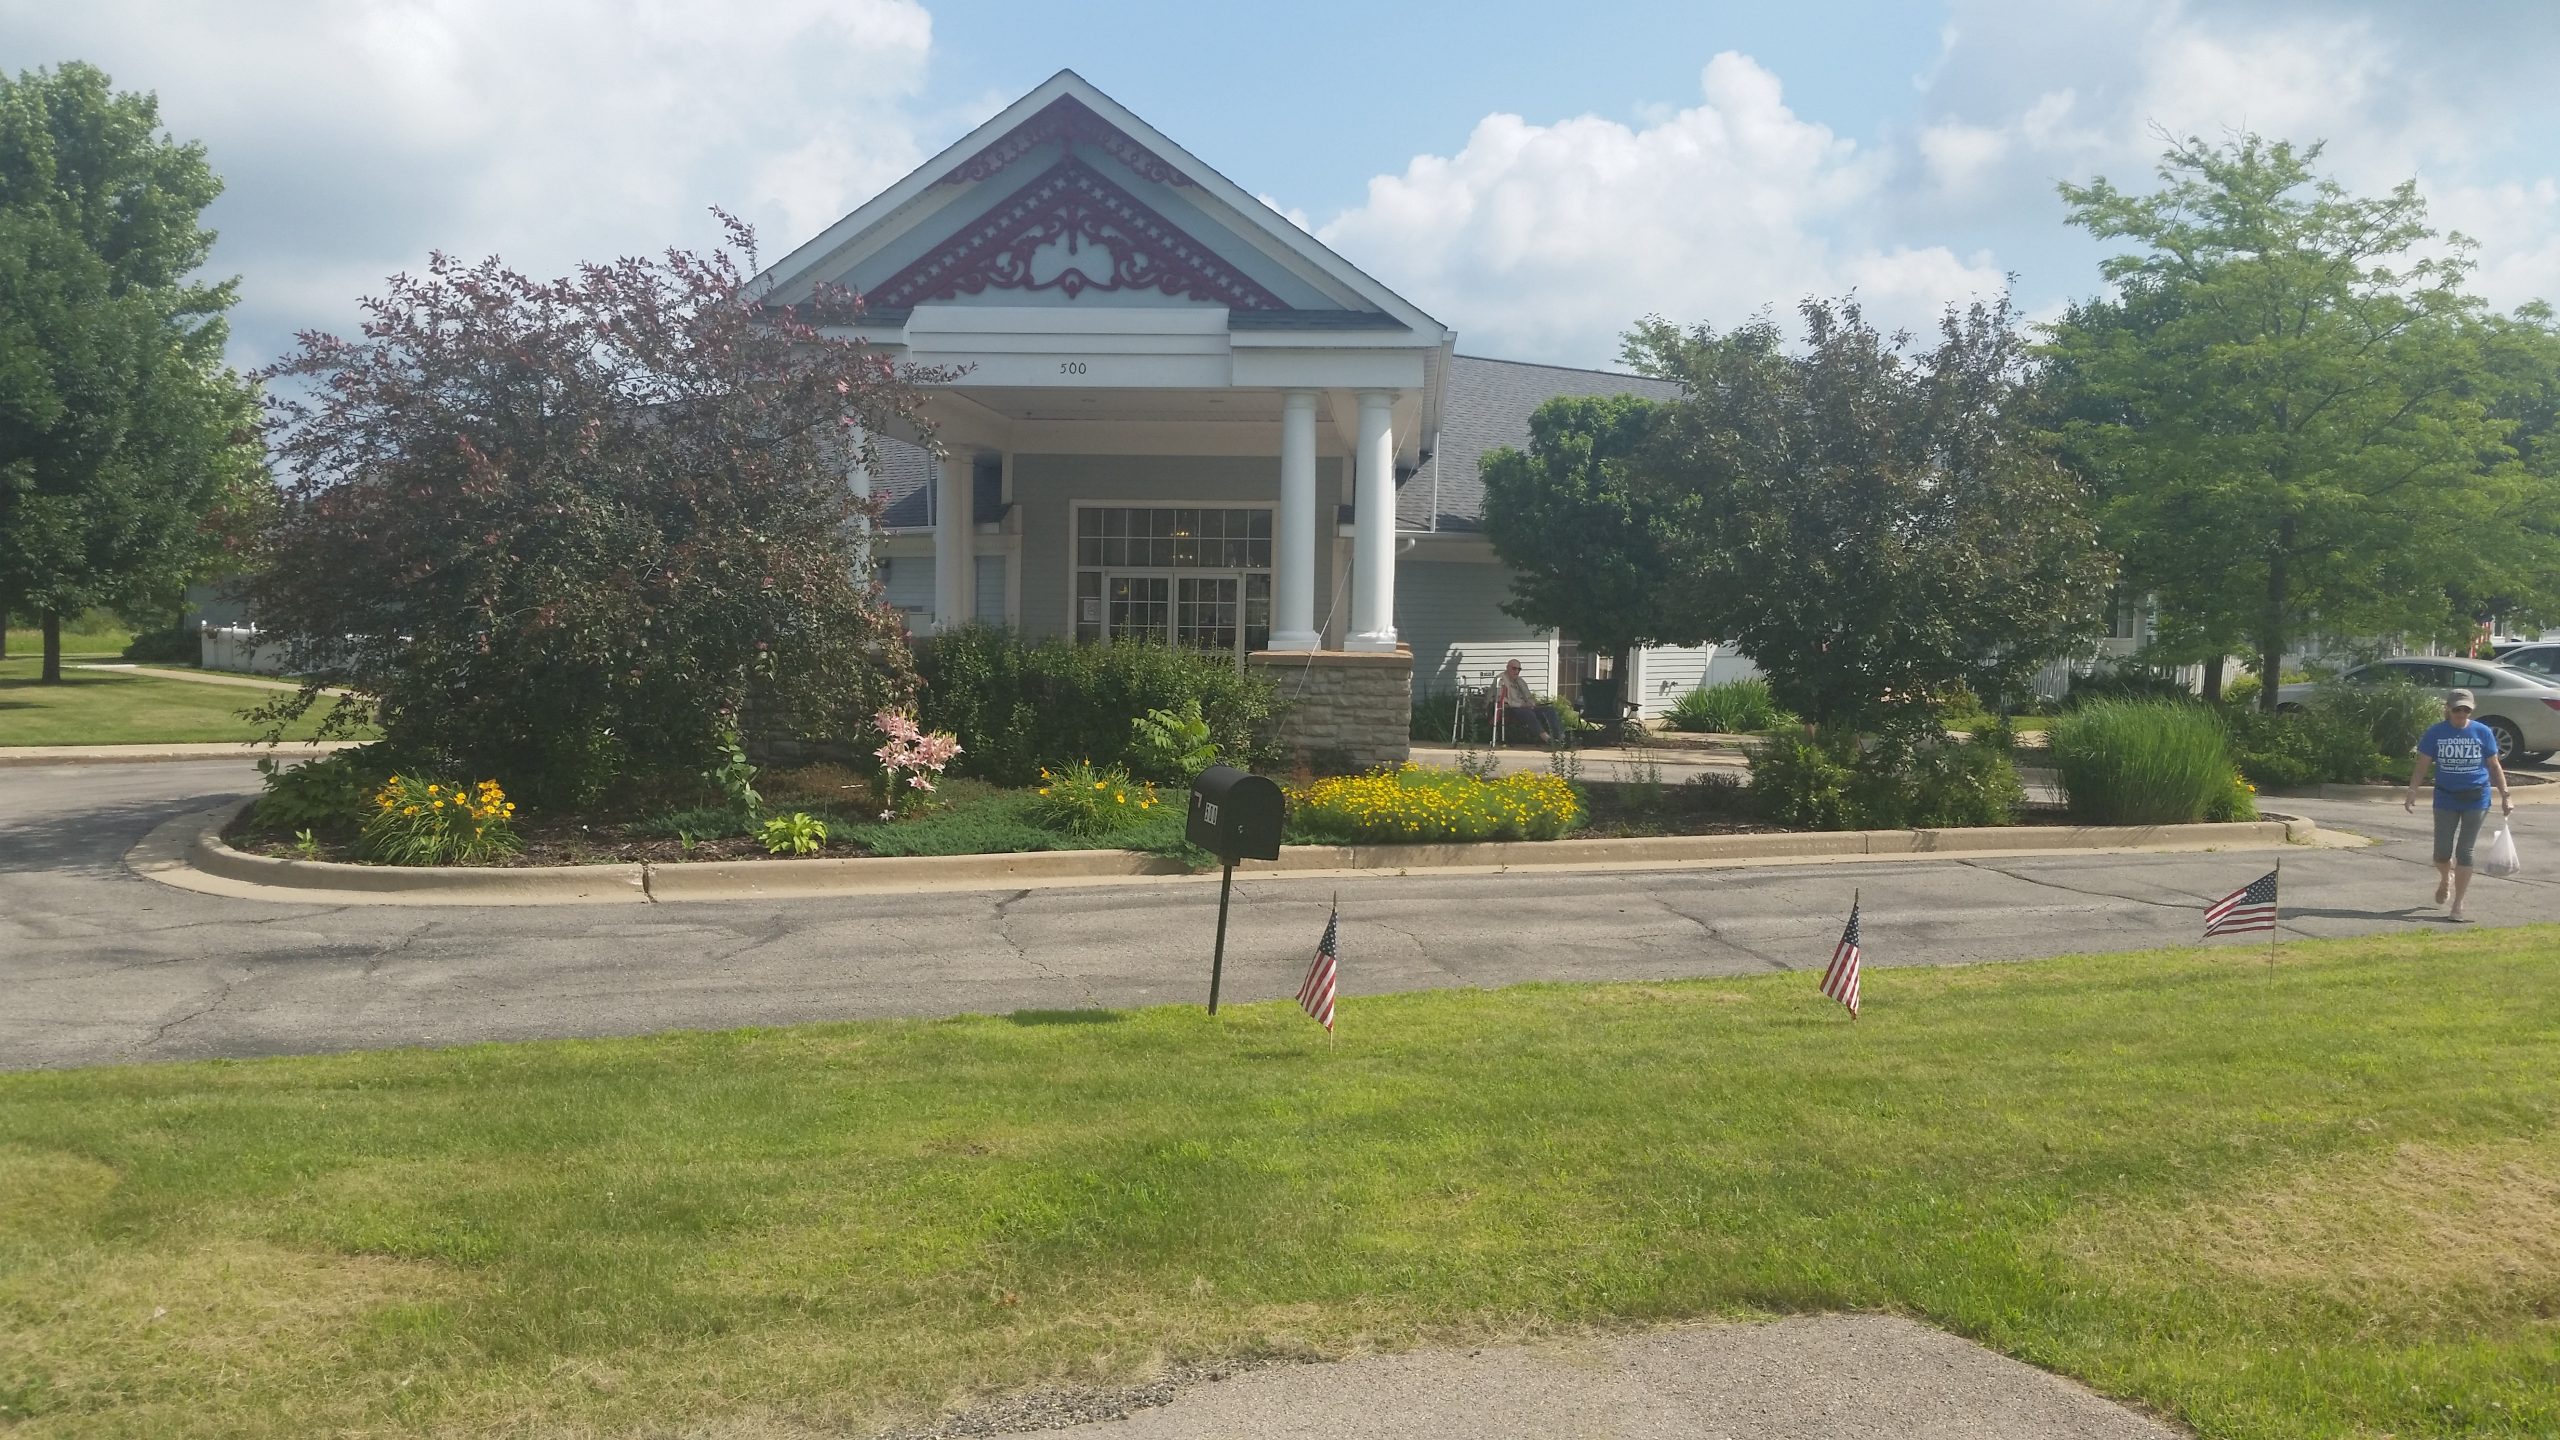 Prairie View Assisted Living